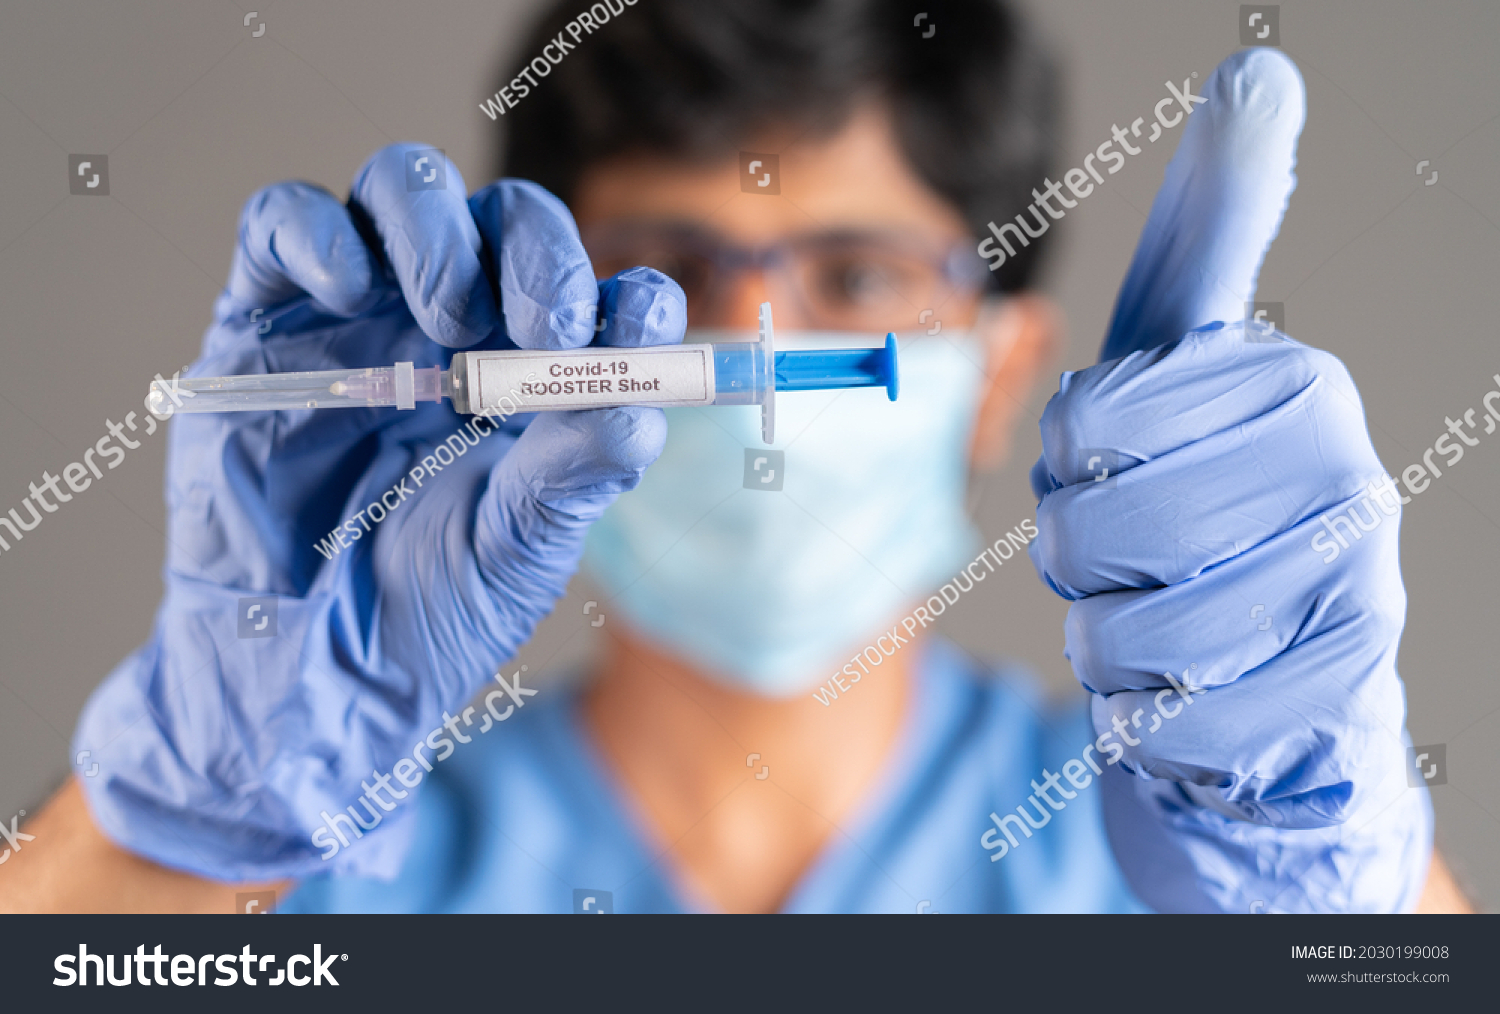 Close up of doctor hands with covid-19 booster shot syringe showing thumbs up - concept showing of recommendation of 3rd dose vaccination for immune weakened people. #2030199008